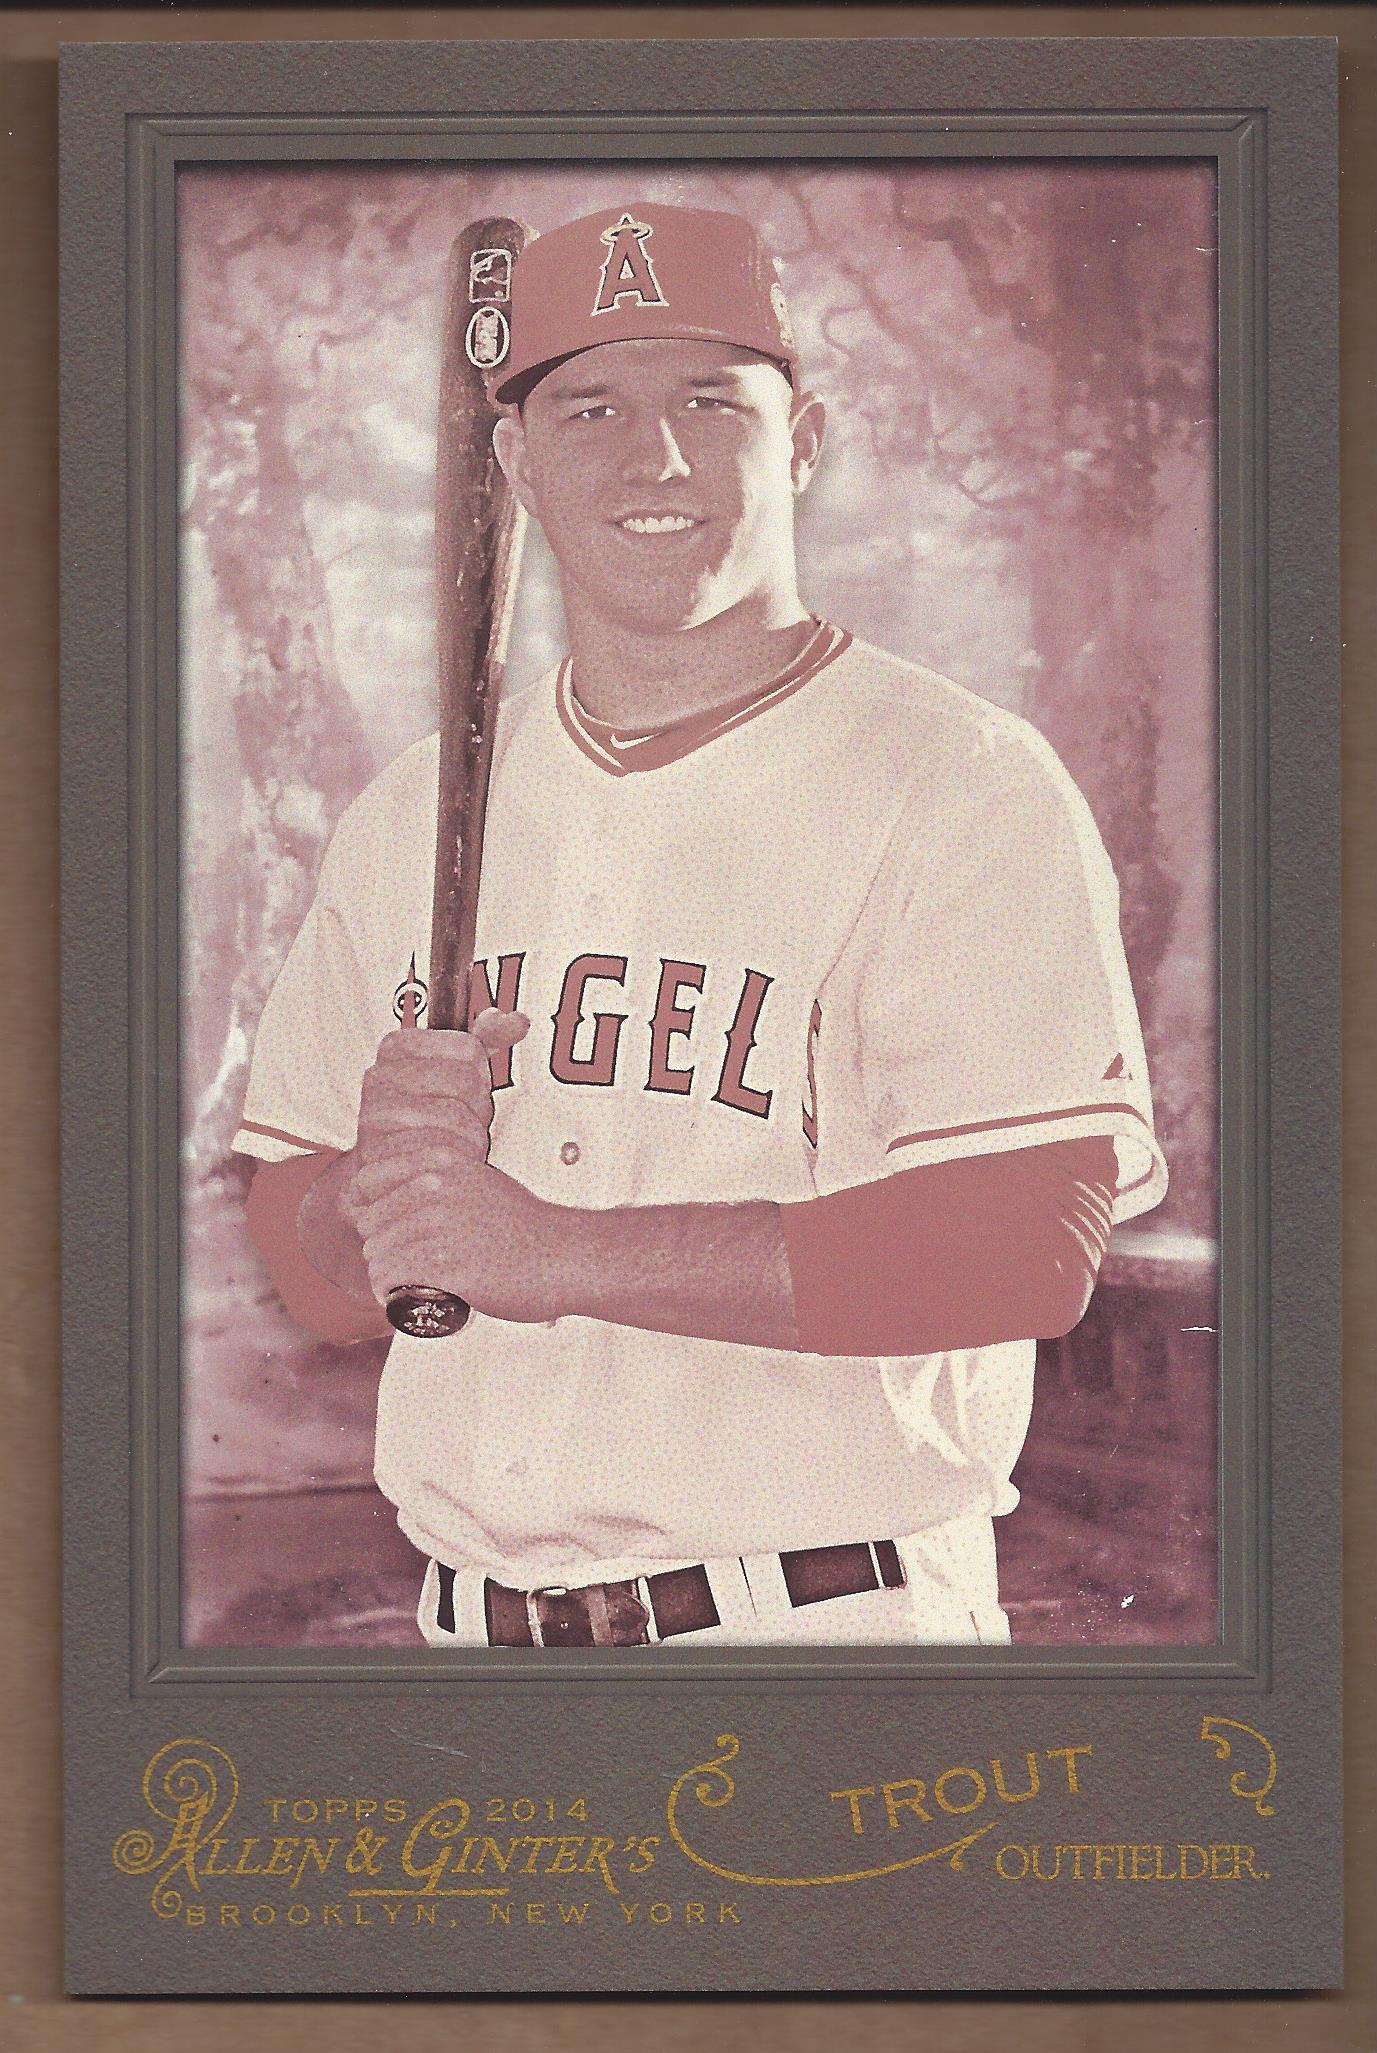 2014 Topps Allen and Ginter Box Toppers #BL05 Mike Trout